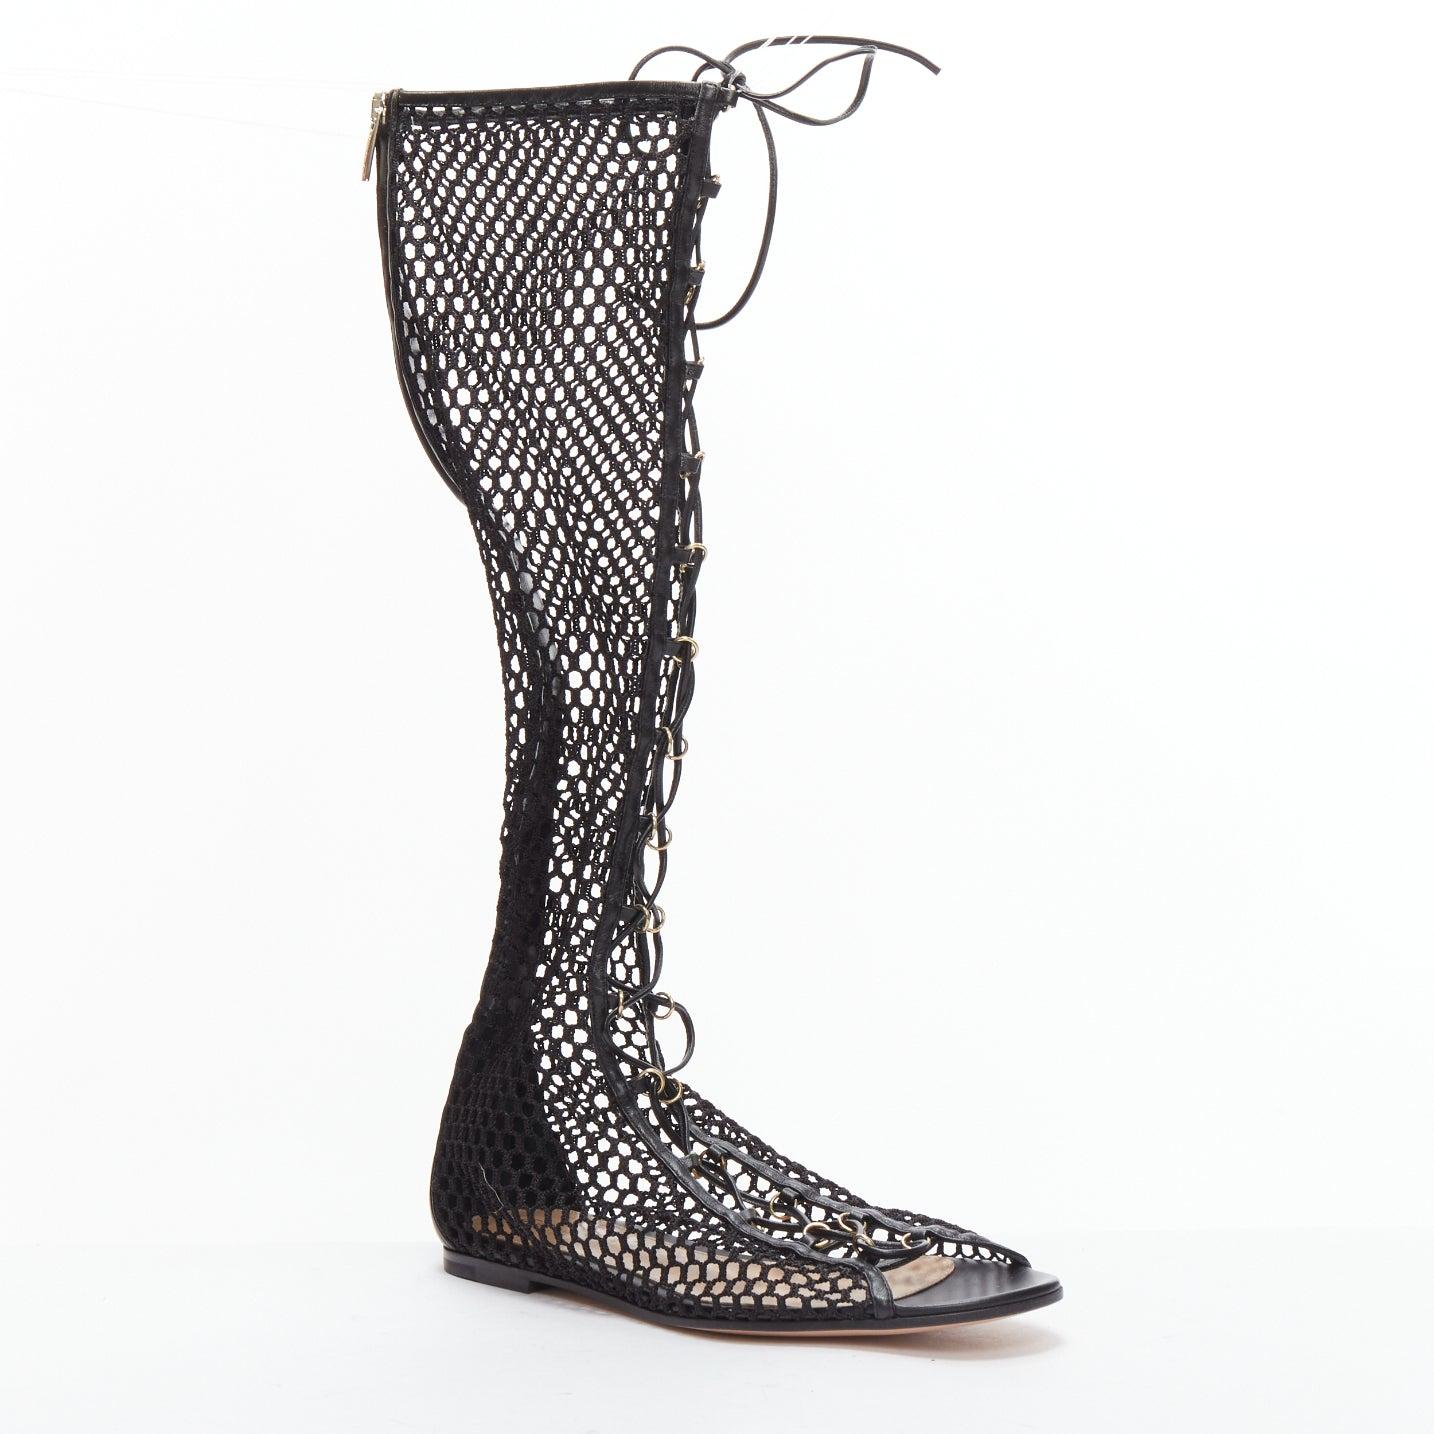 GIANVITO ROSSI Helena black crochet mesh gold rings lace up sandals EU38
Reference: BSHW/A00169
Brand: Gianvito Rossi
Model: Helena
Material: Leather, Mesh
Color: Black, Gold
Pattern: Solid
Closure: Zip
Lining: Nude Leather
Extra Details: Gianvito